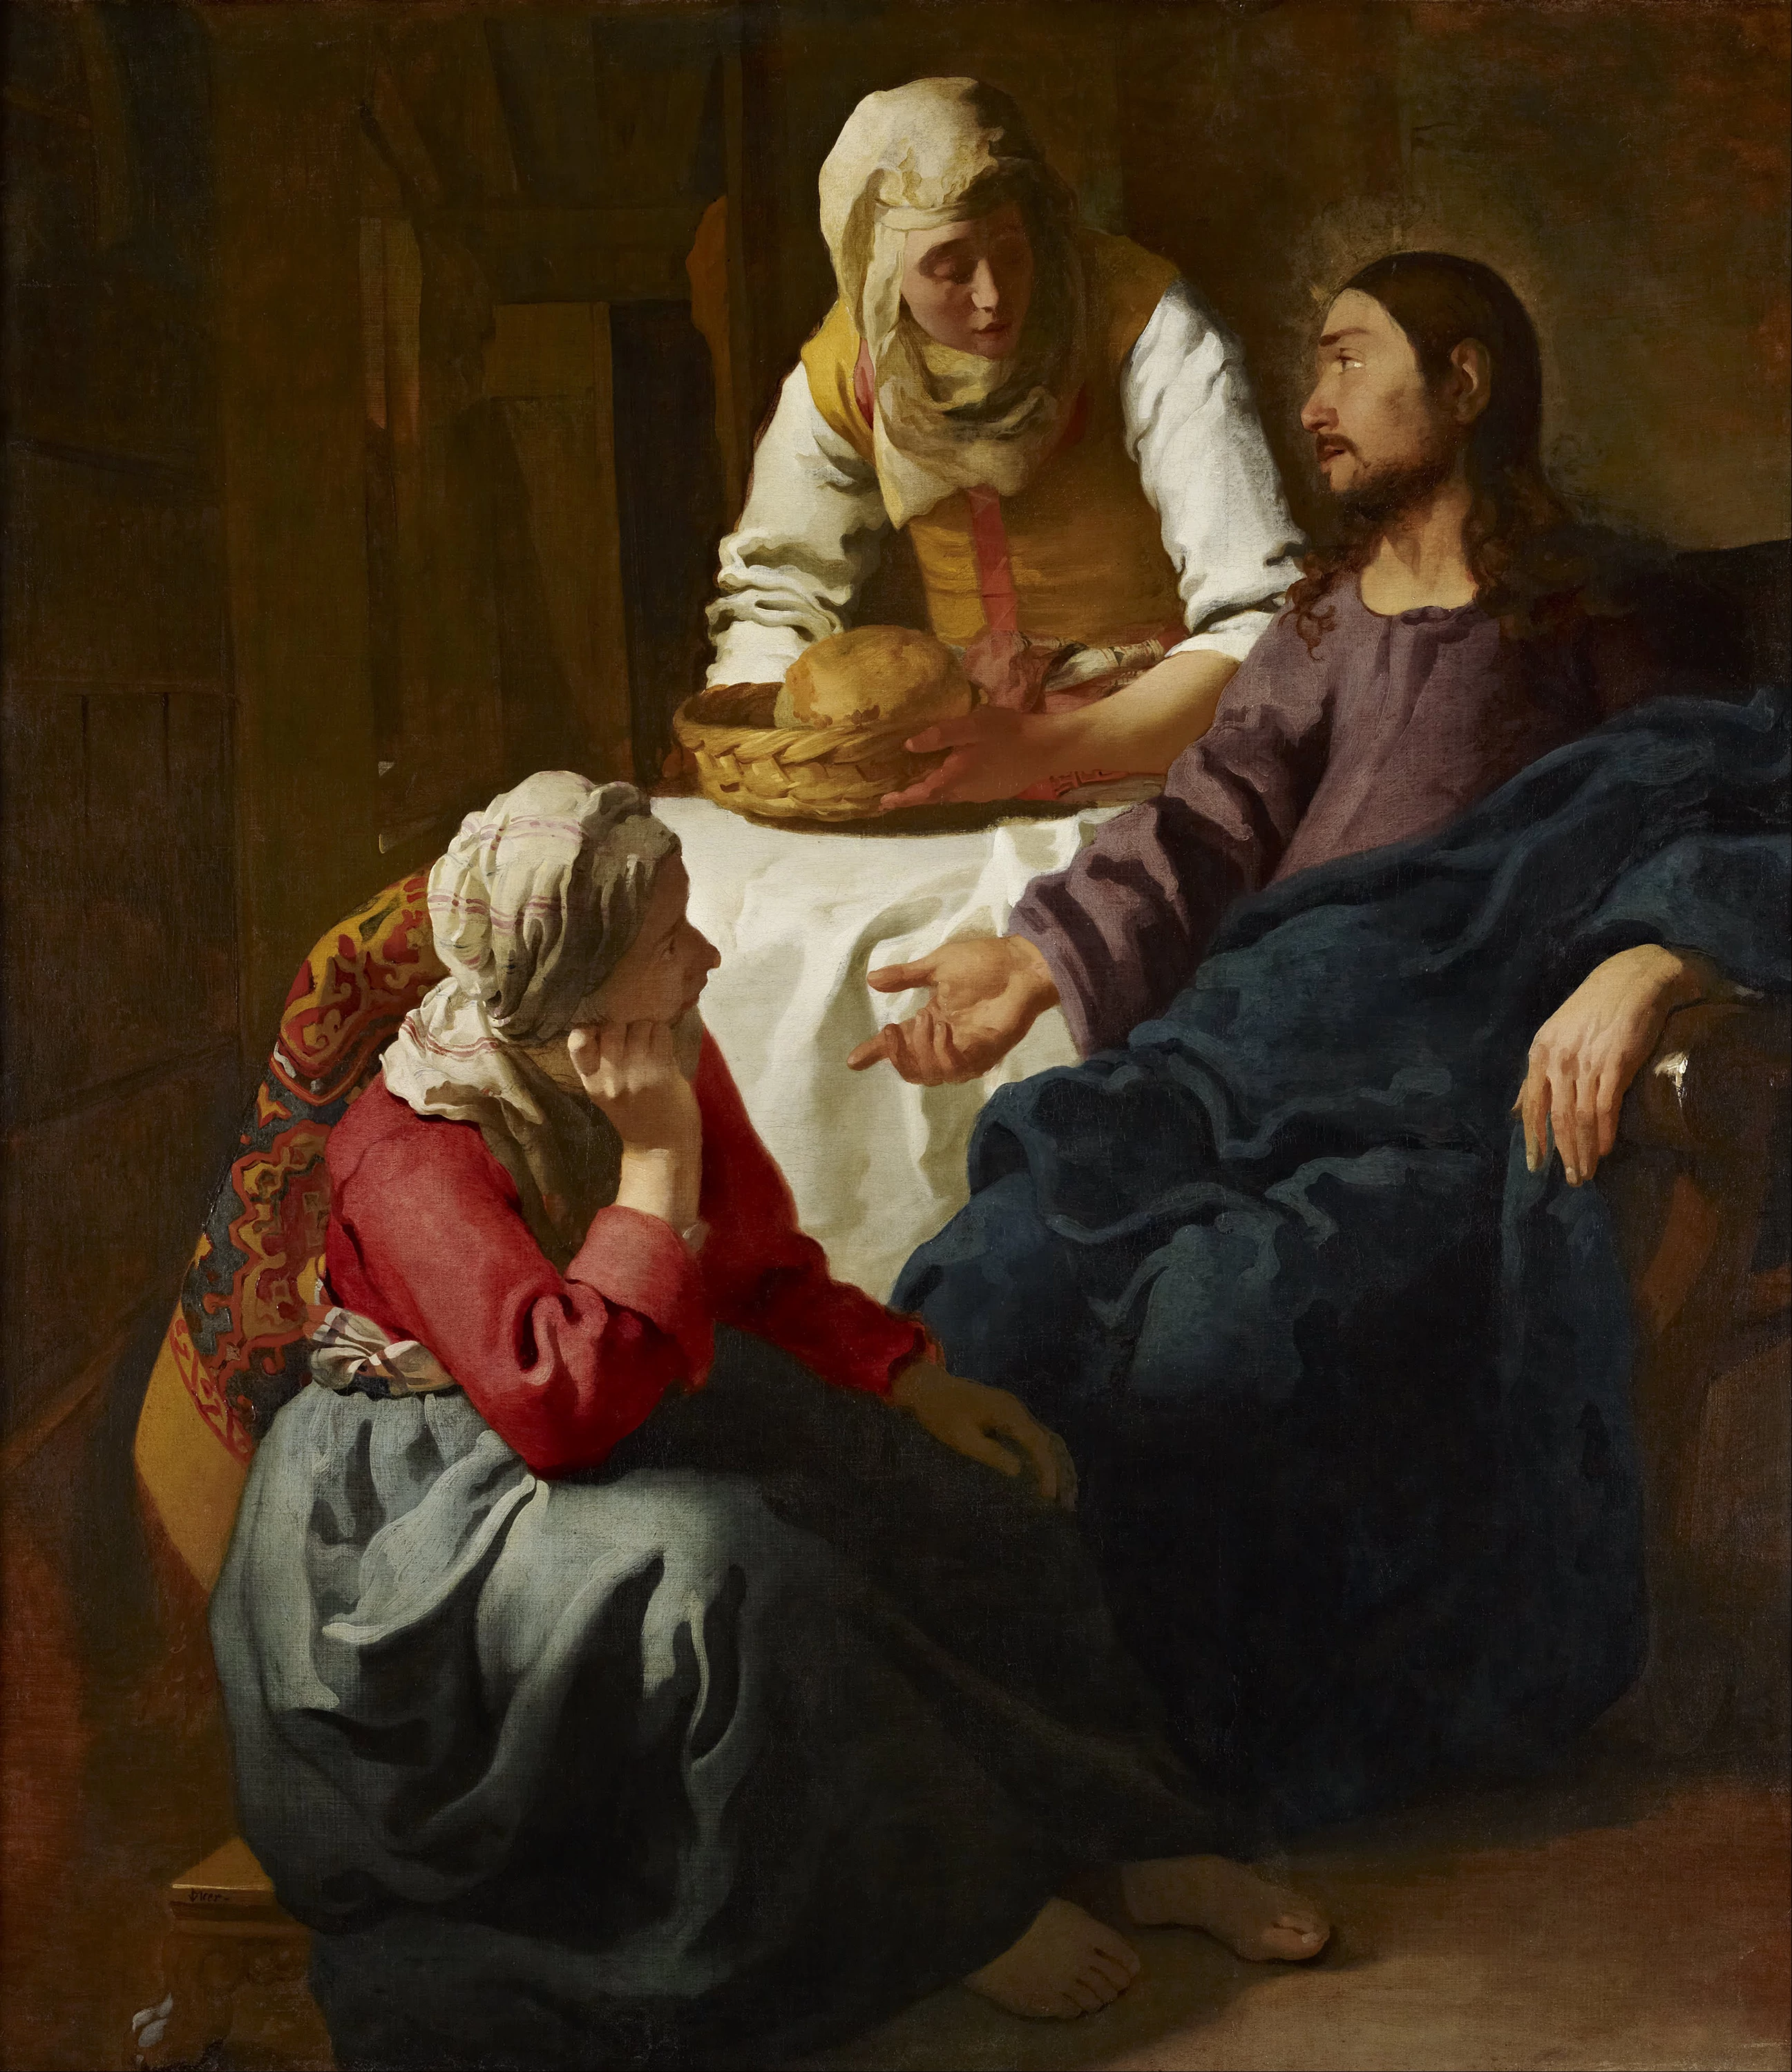 Christ in the House of Martha and Mary, Johannes Vermeer